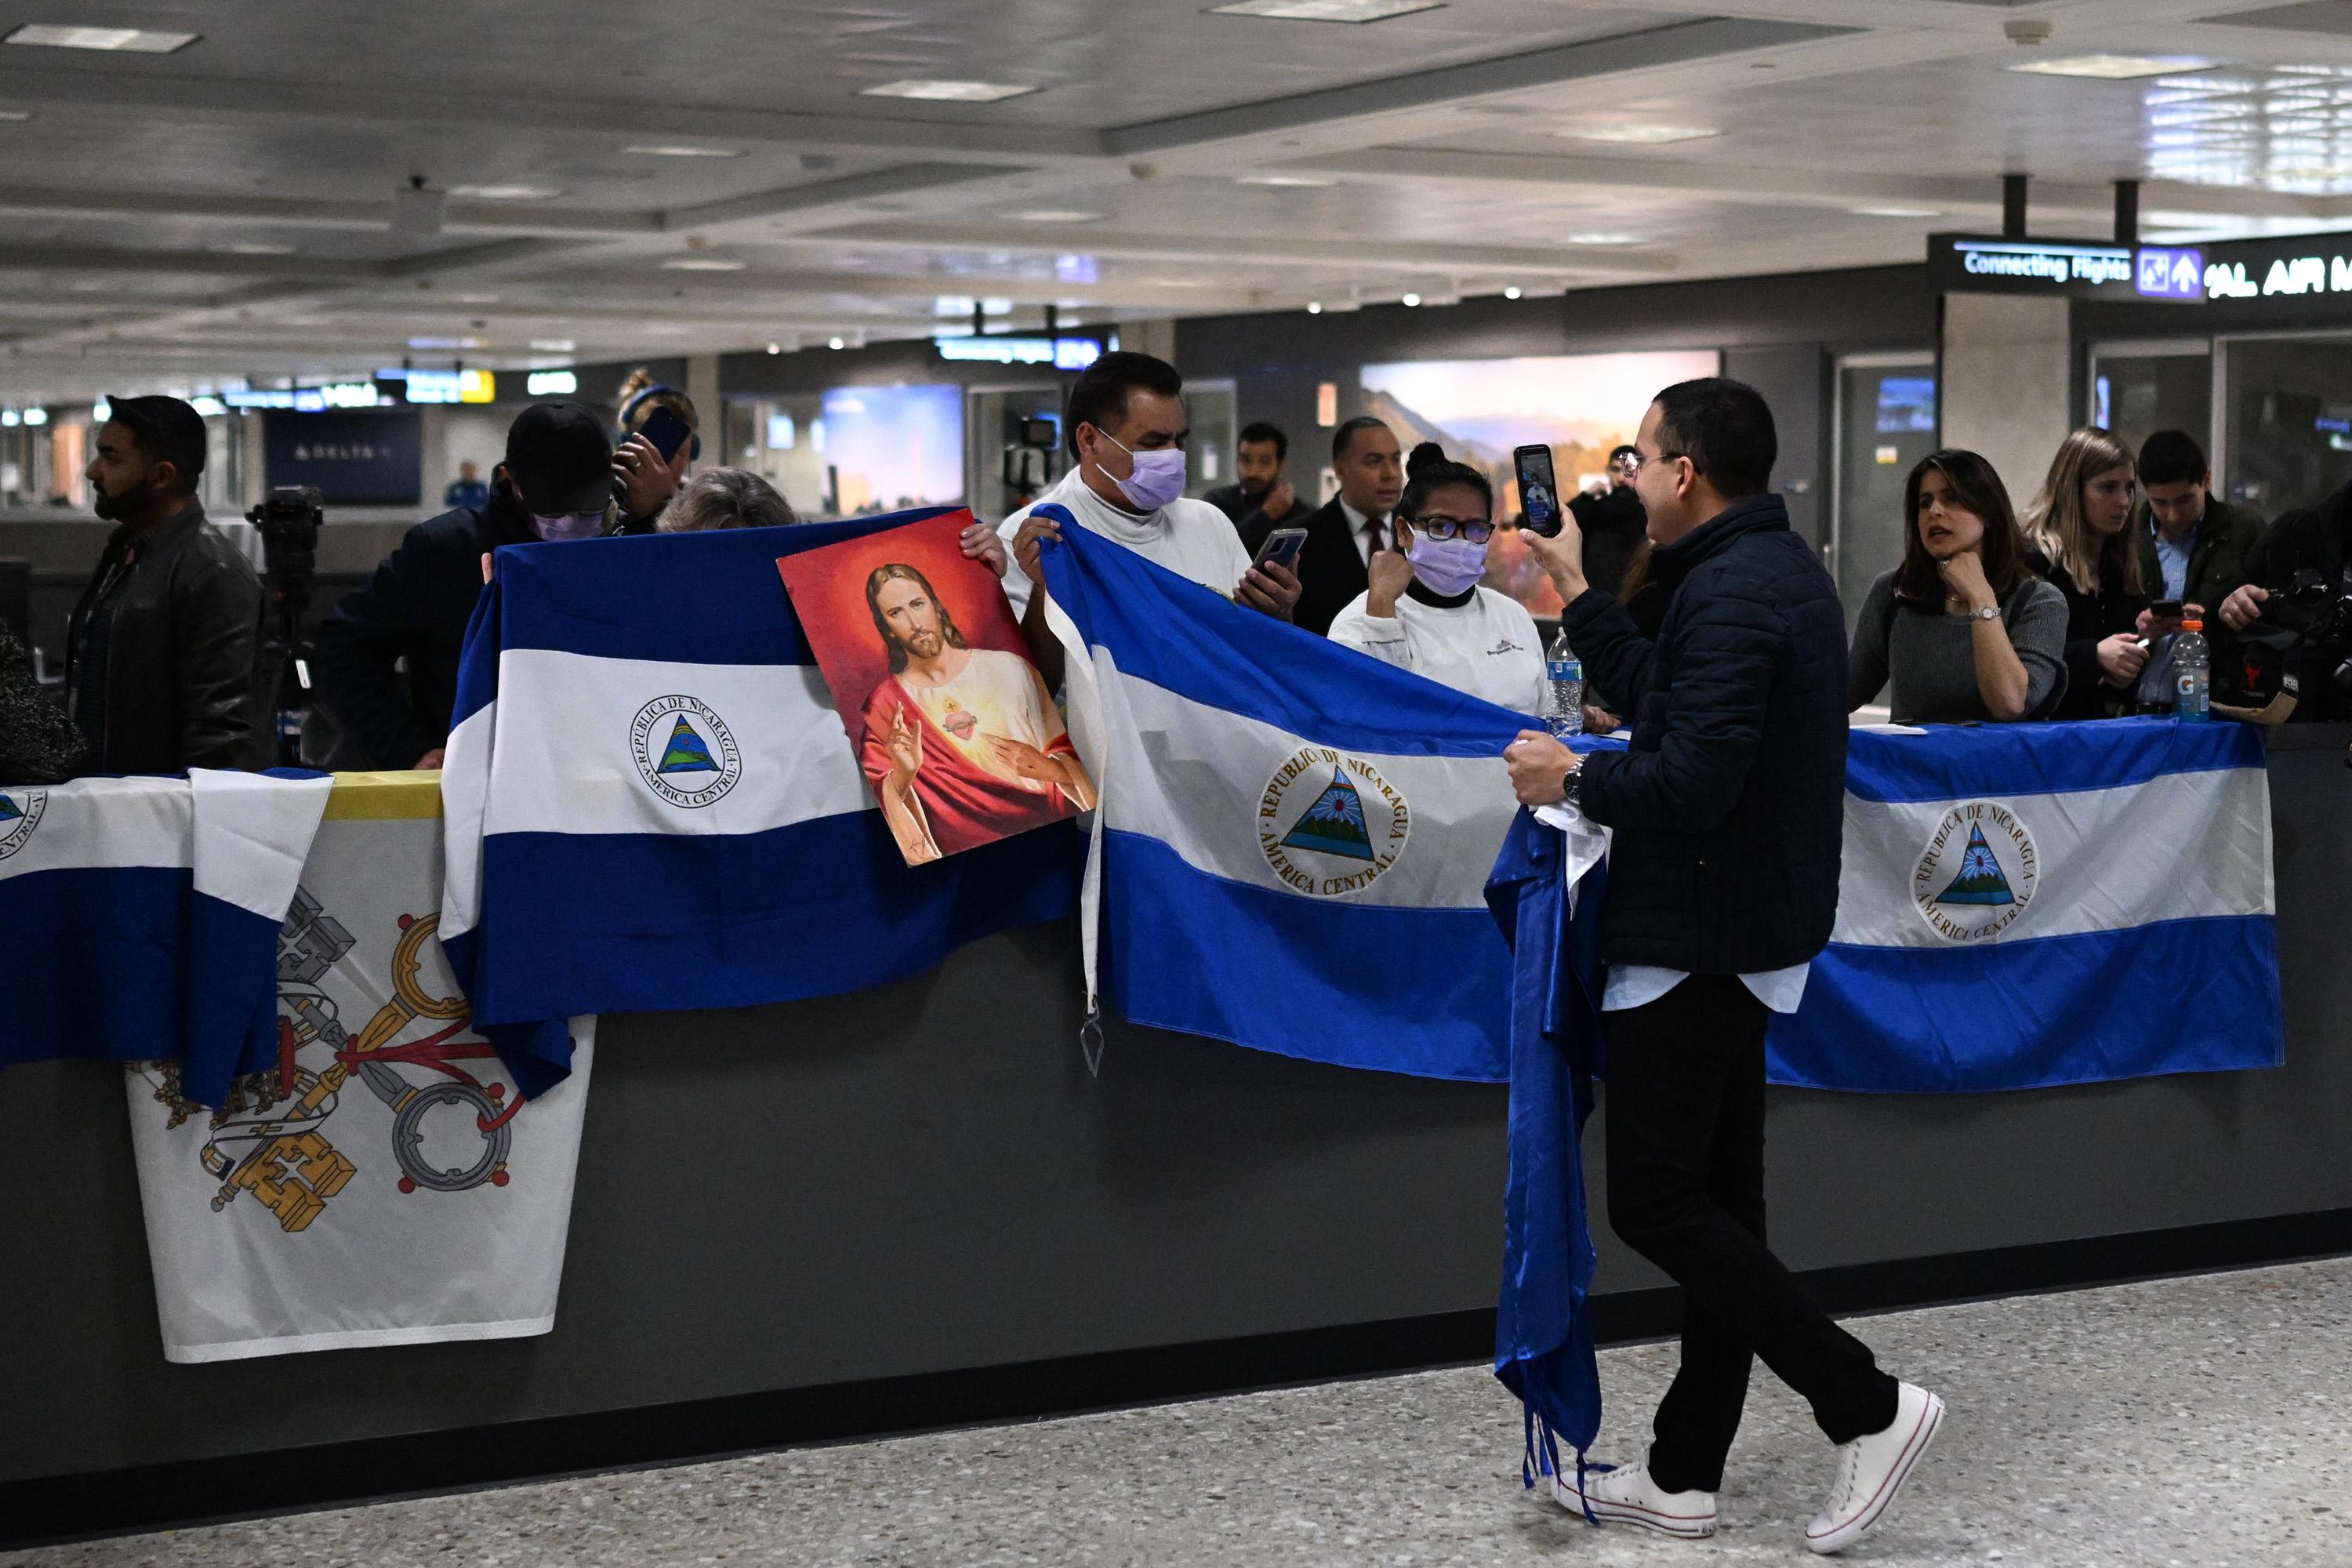 Activists and sympathizers await the arrival of released Nicaraguan political prisoners in Dulles International Airport in Virginia on Feb. 9, 2023. The Nicaraguan legislature voted that day to strip them of their citizenship. Photo: Andrew Caballero/El Faro